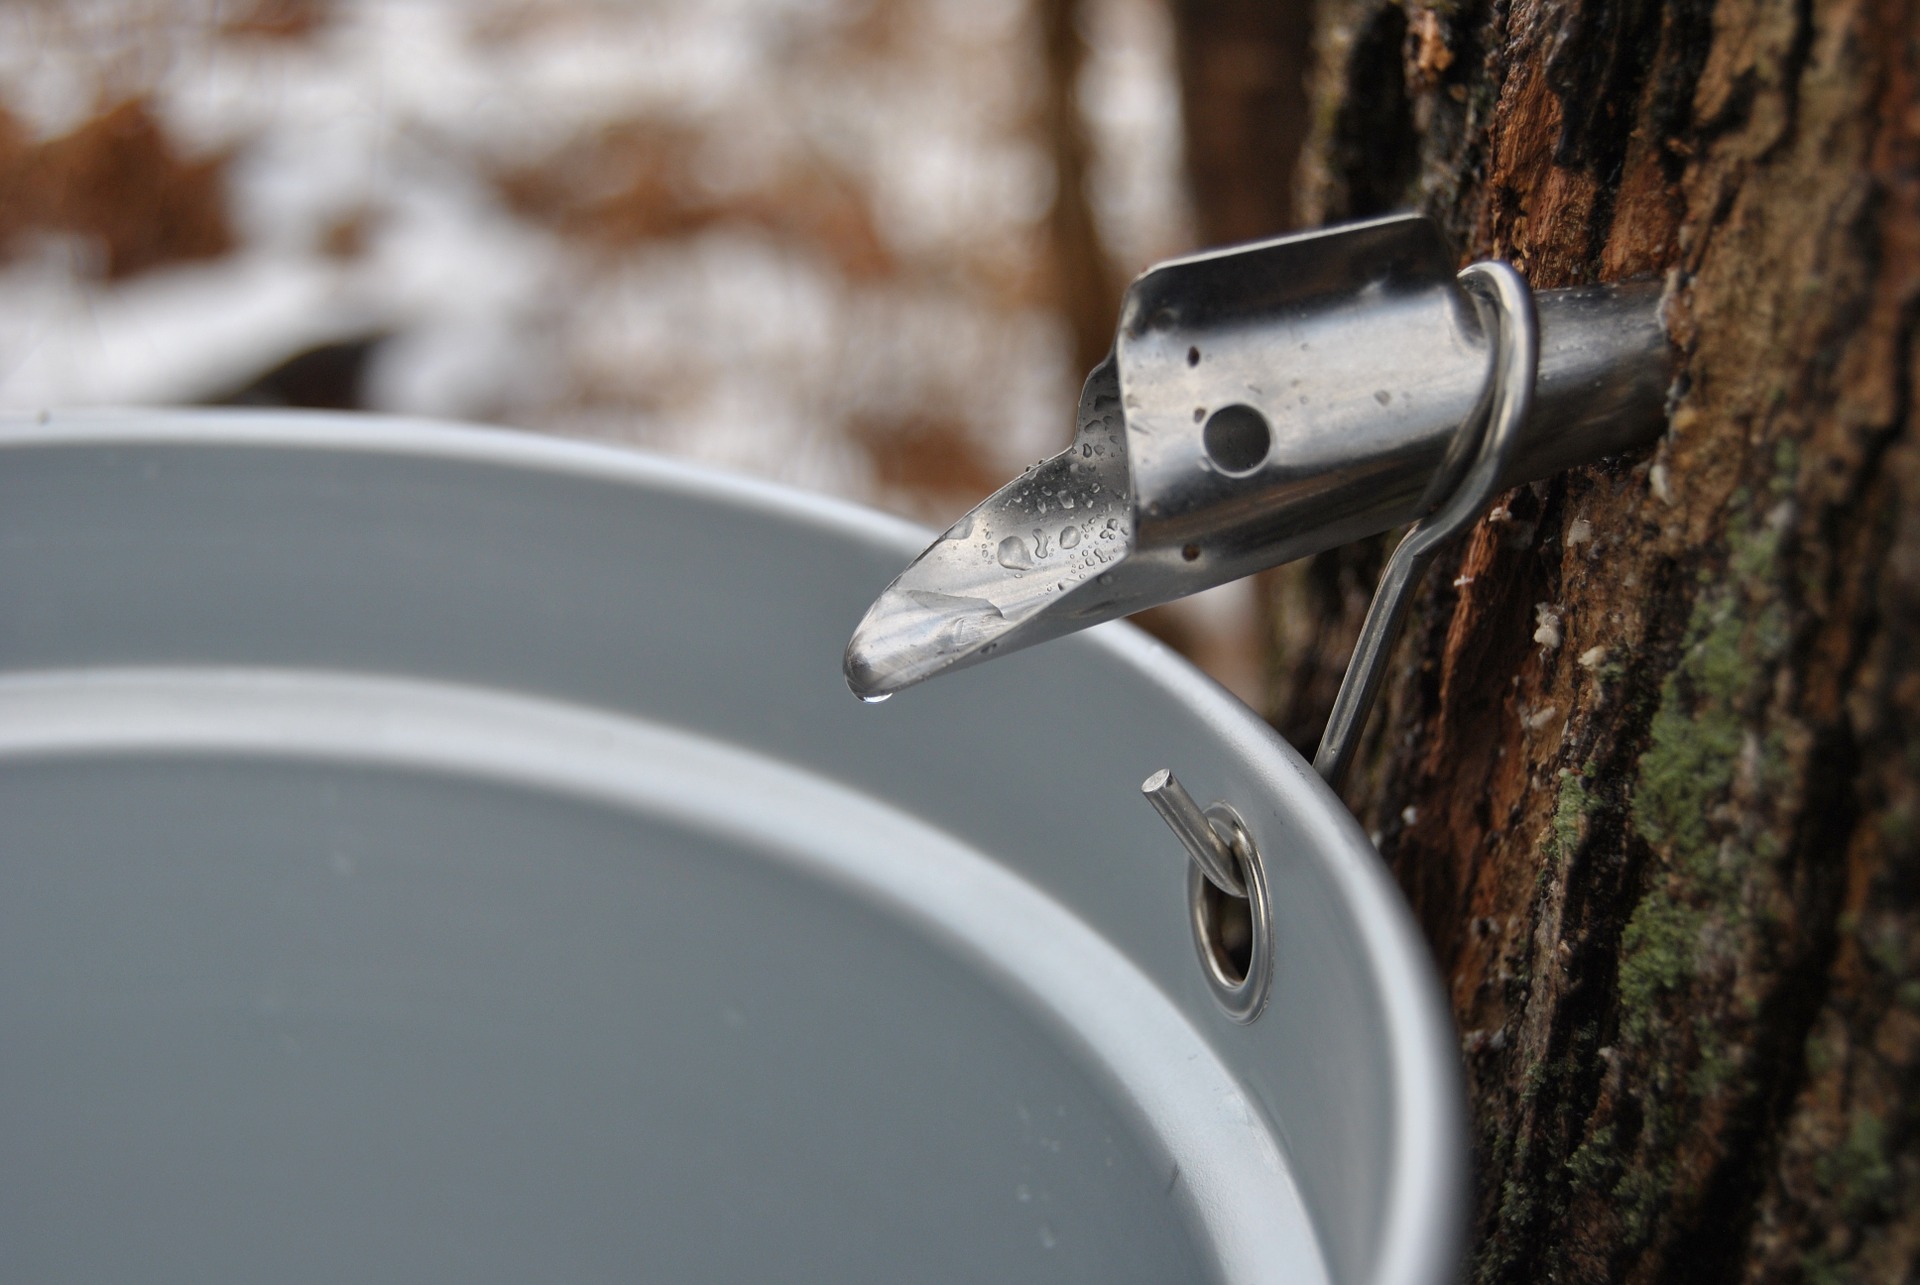 50 SAP SPOUTS Bucket SPILES TAPS Maple Syrup READY TO USE 